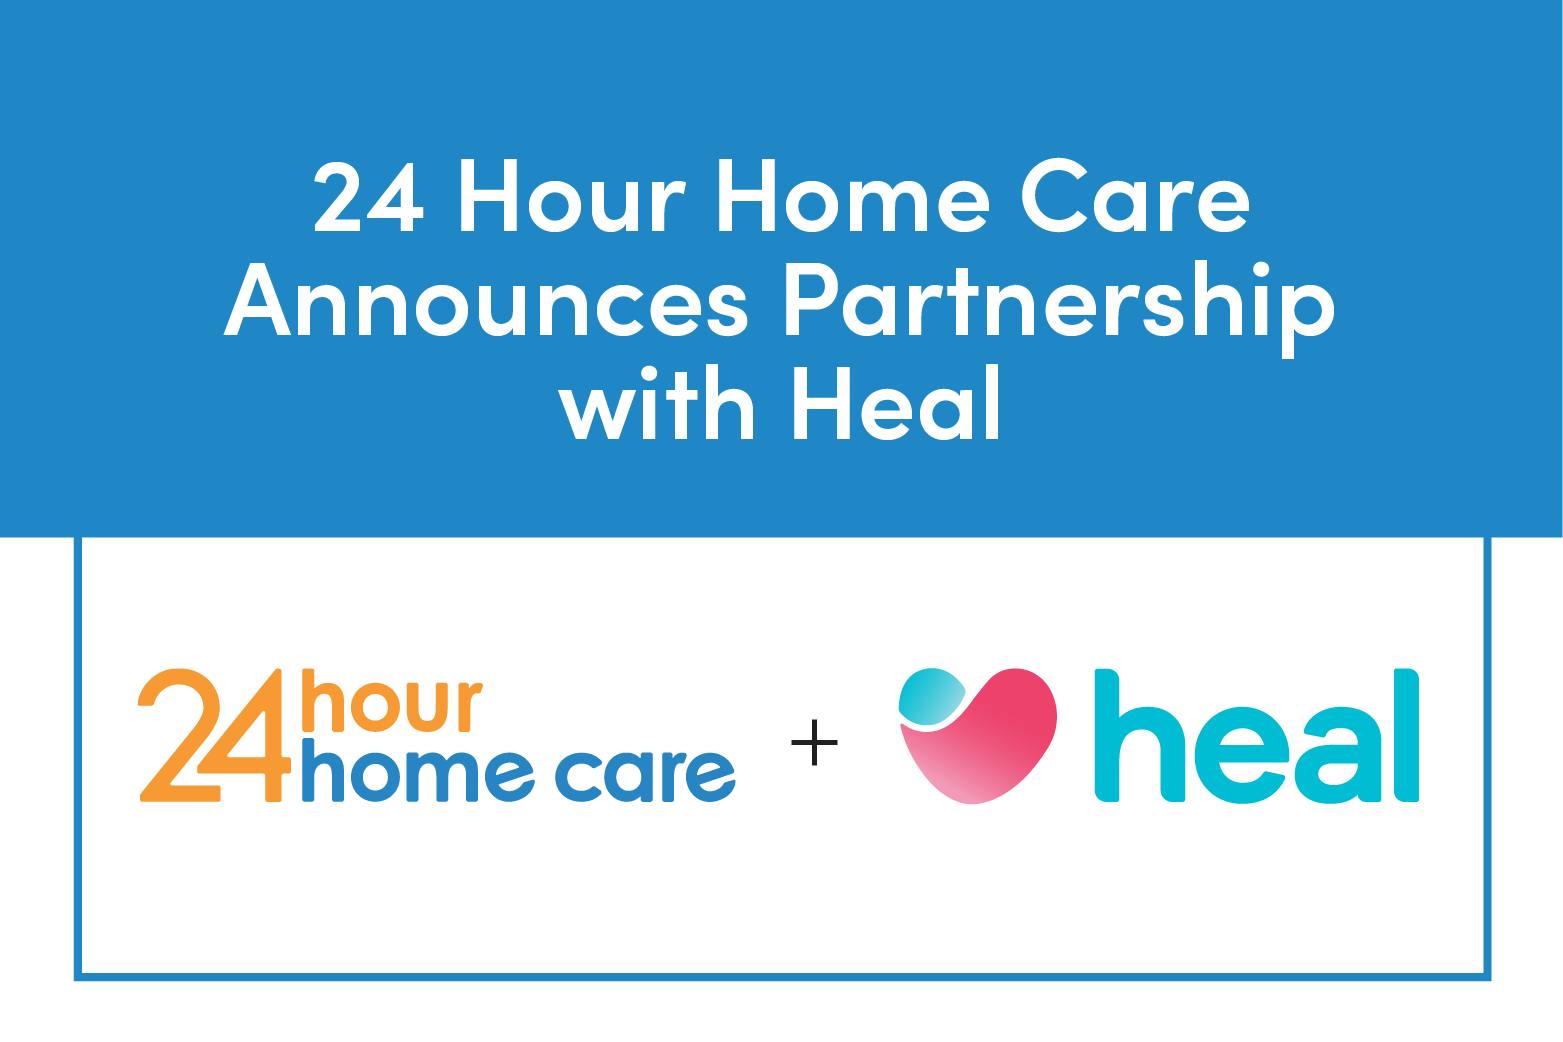 24 Hour Home Care Partners with Heal